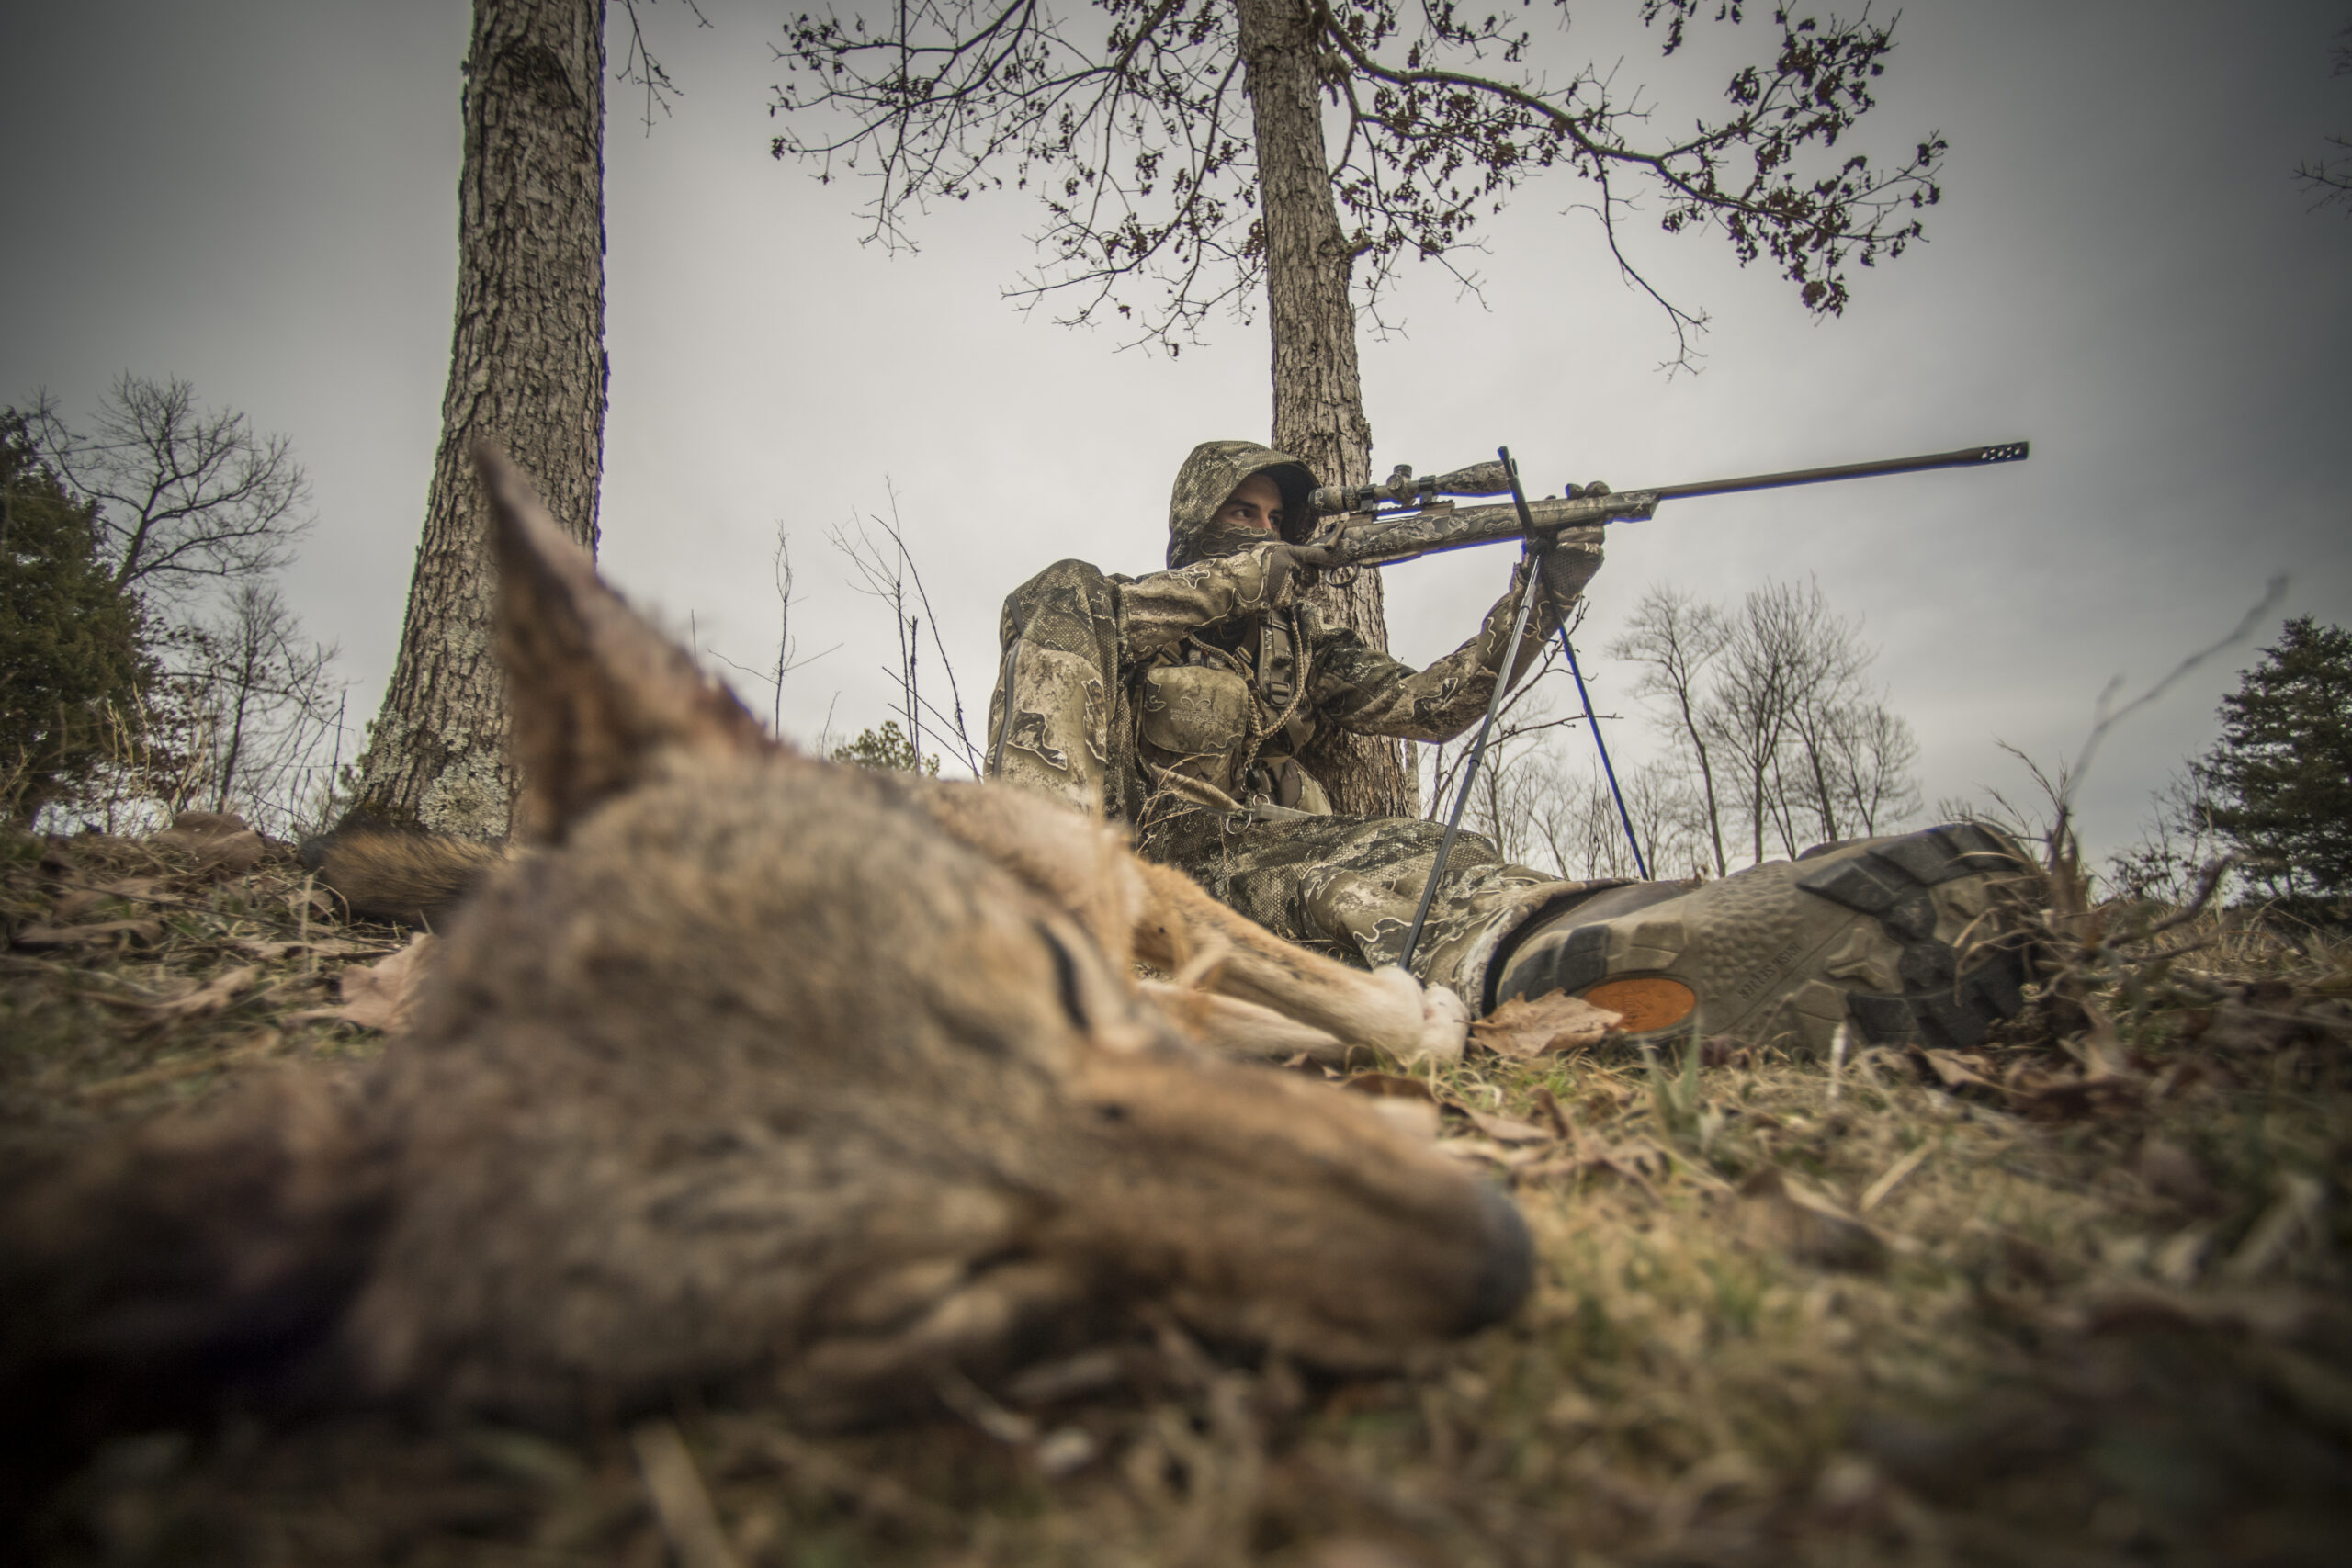 Trapping and hunting coyotes can help deer populations.